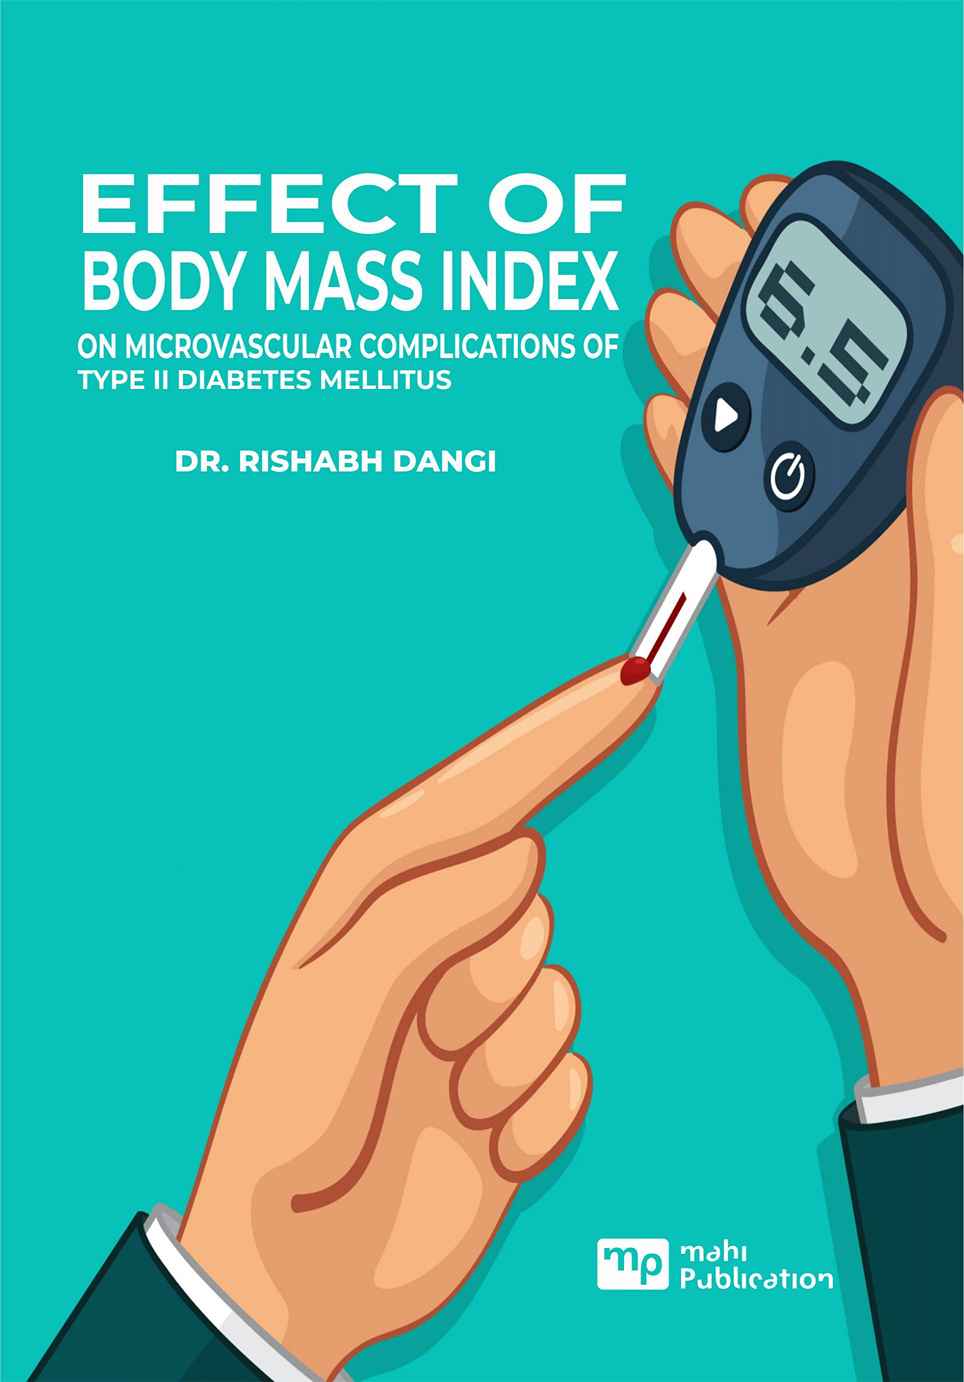 Effect of Body Mass Index on Microvascular Complications of Type II Diabetes Mellitus